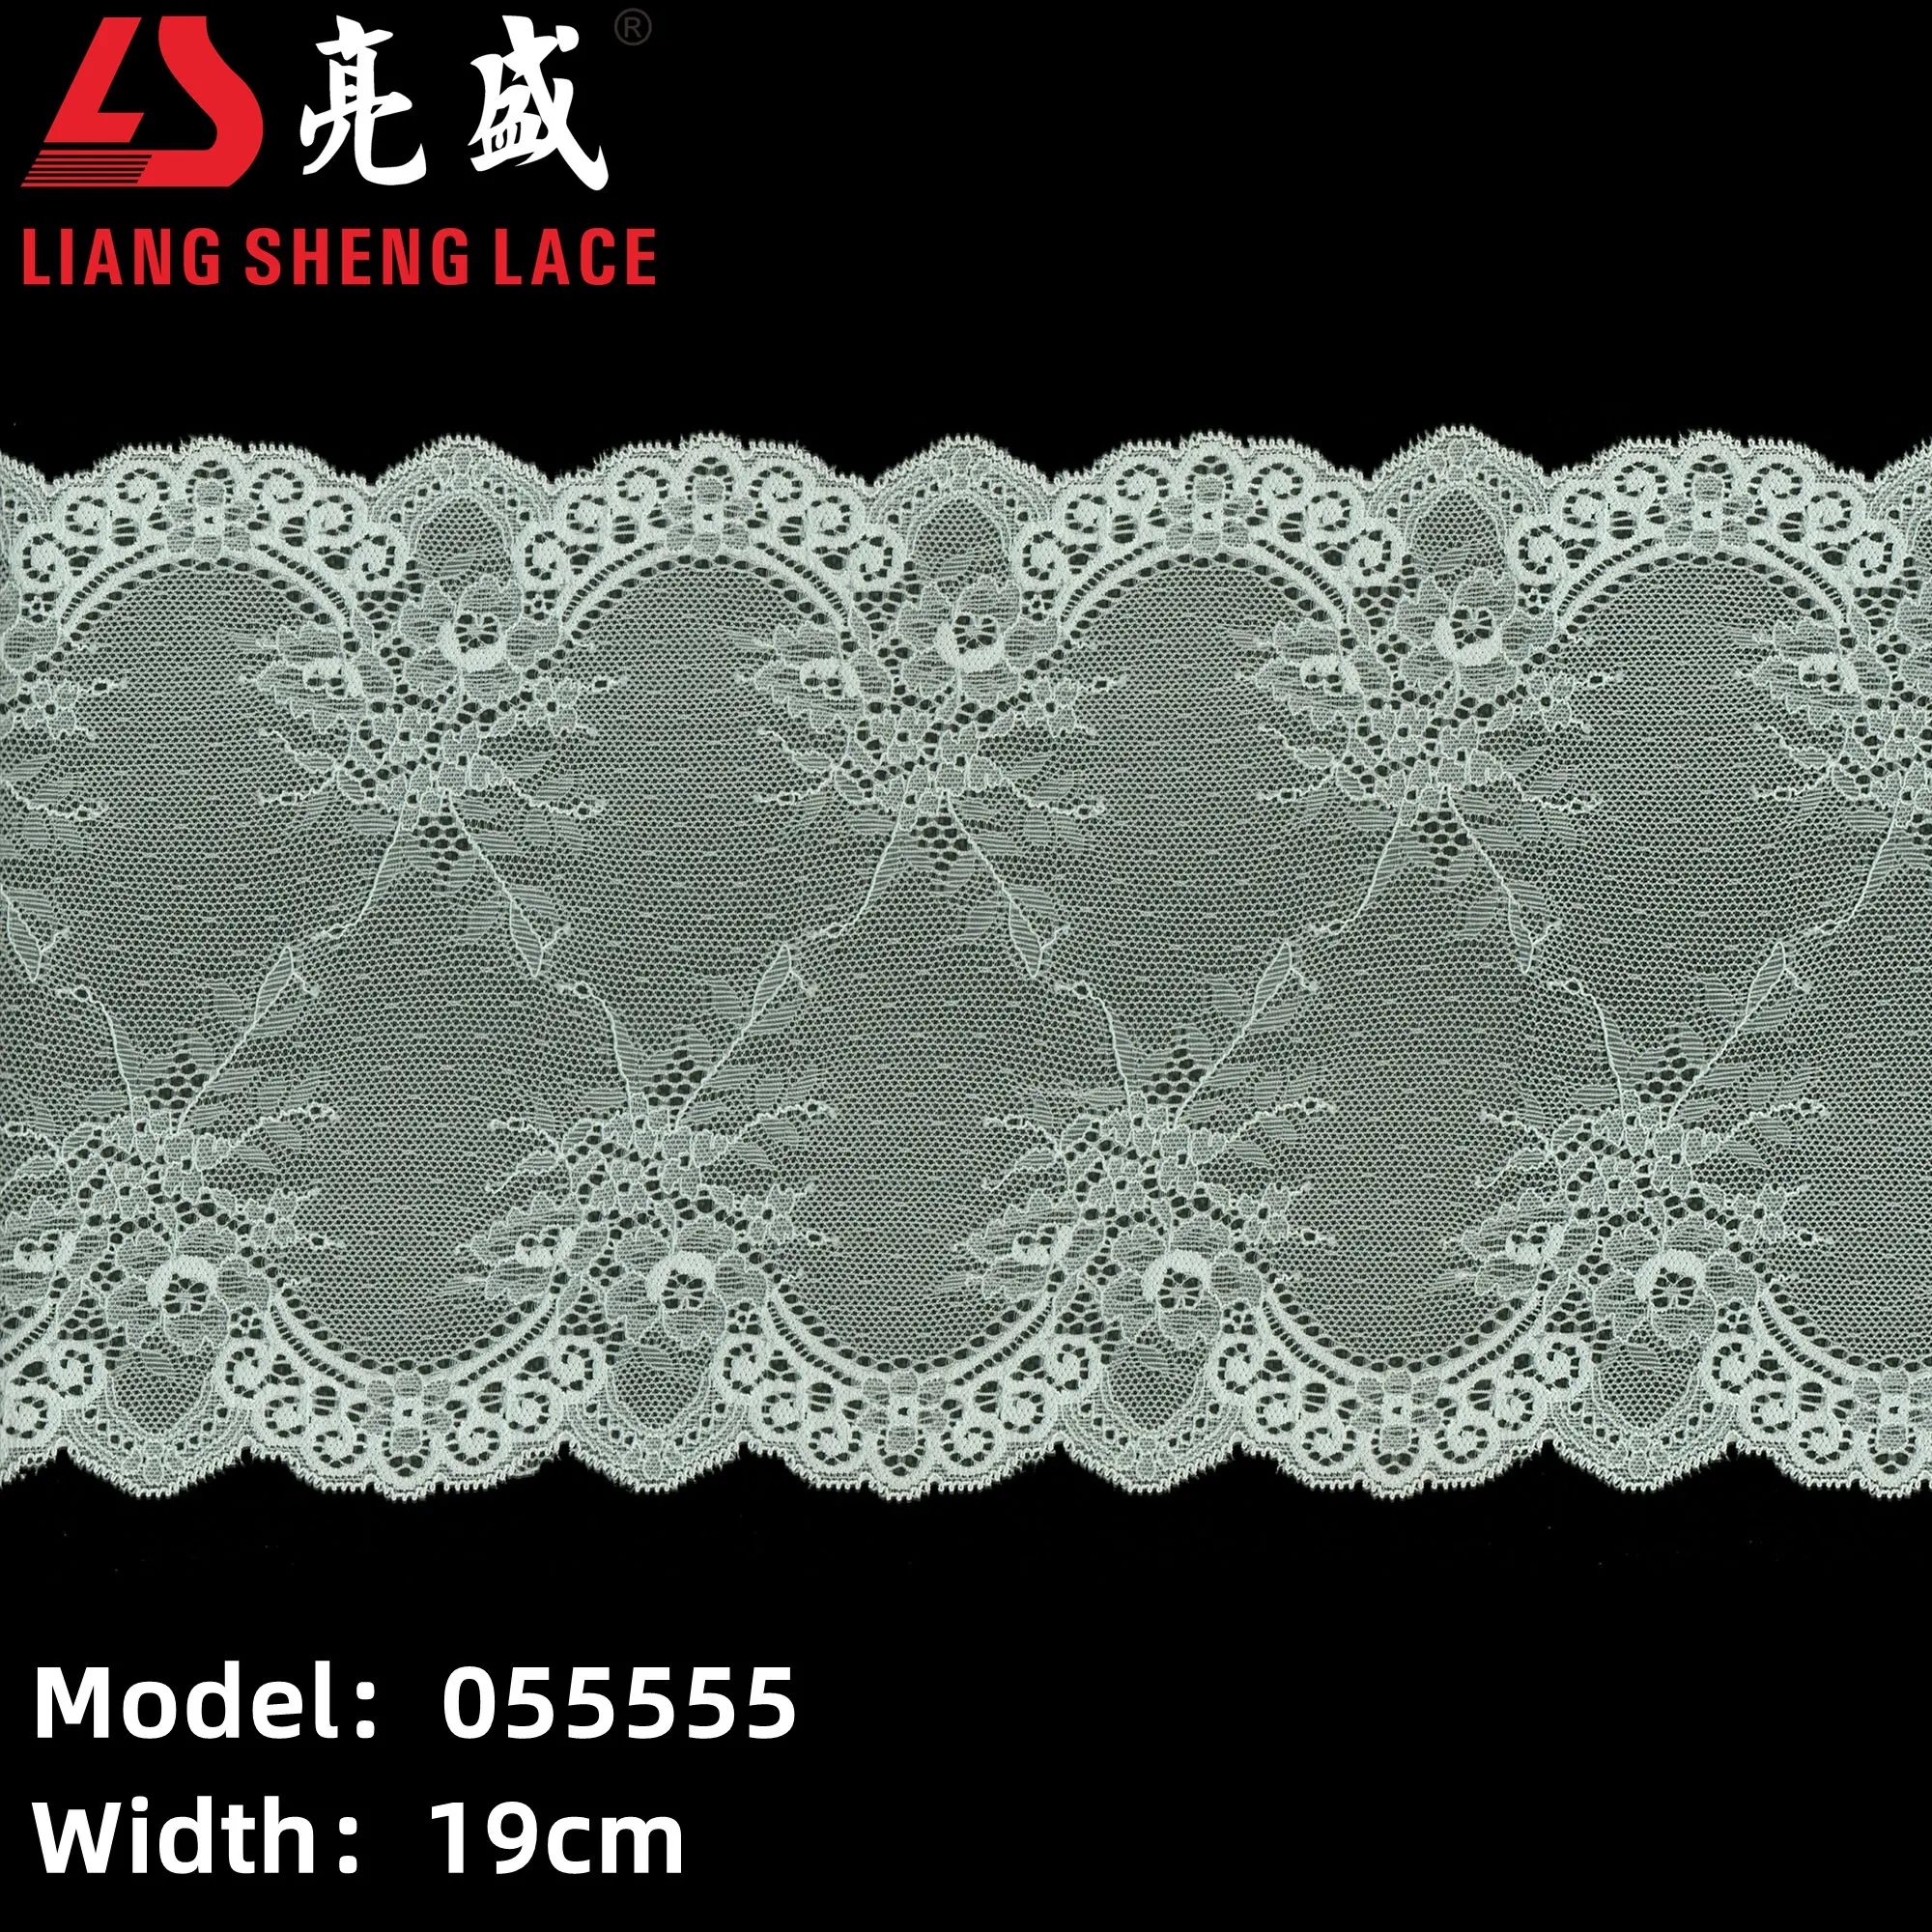 05555 Swiss Elastic Lace Fabric 19cm Flower Green White Knit Border Lace Trim Stretch Chantilly Lace Dress Underwear